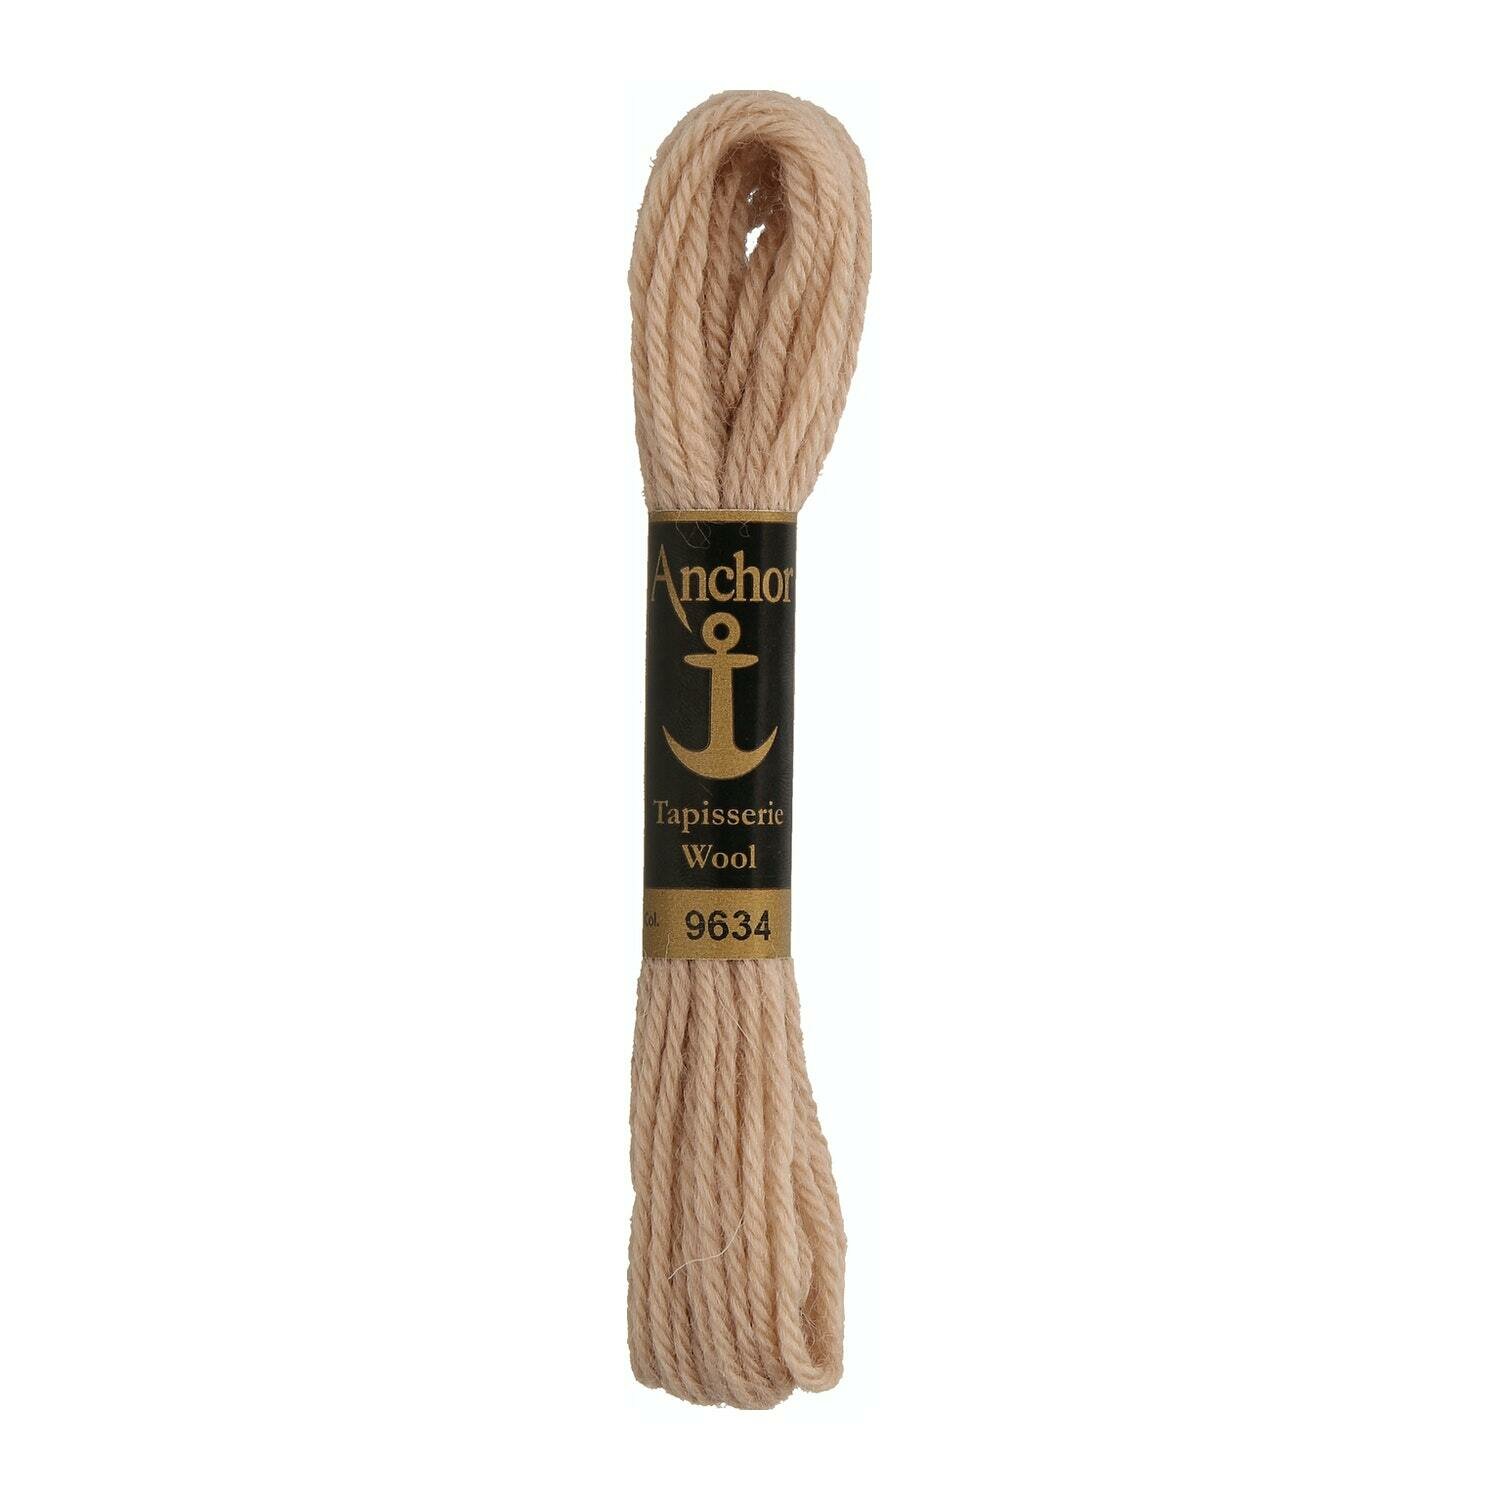 Anchor Tapisserie Wool # 09634